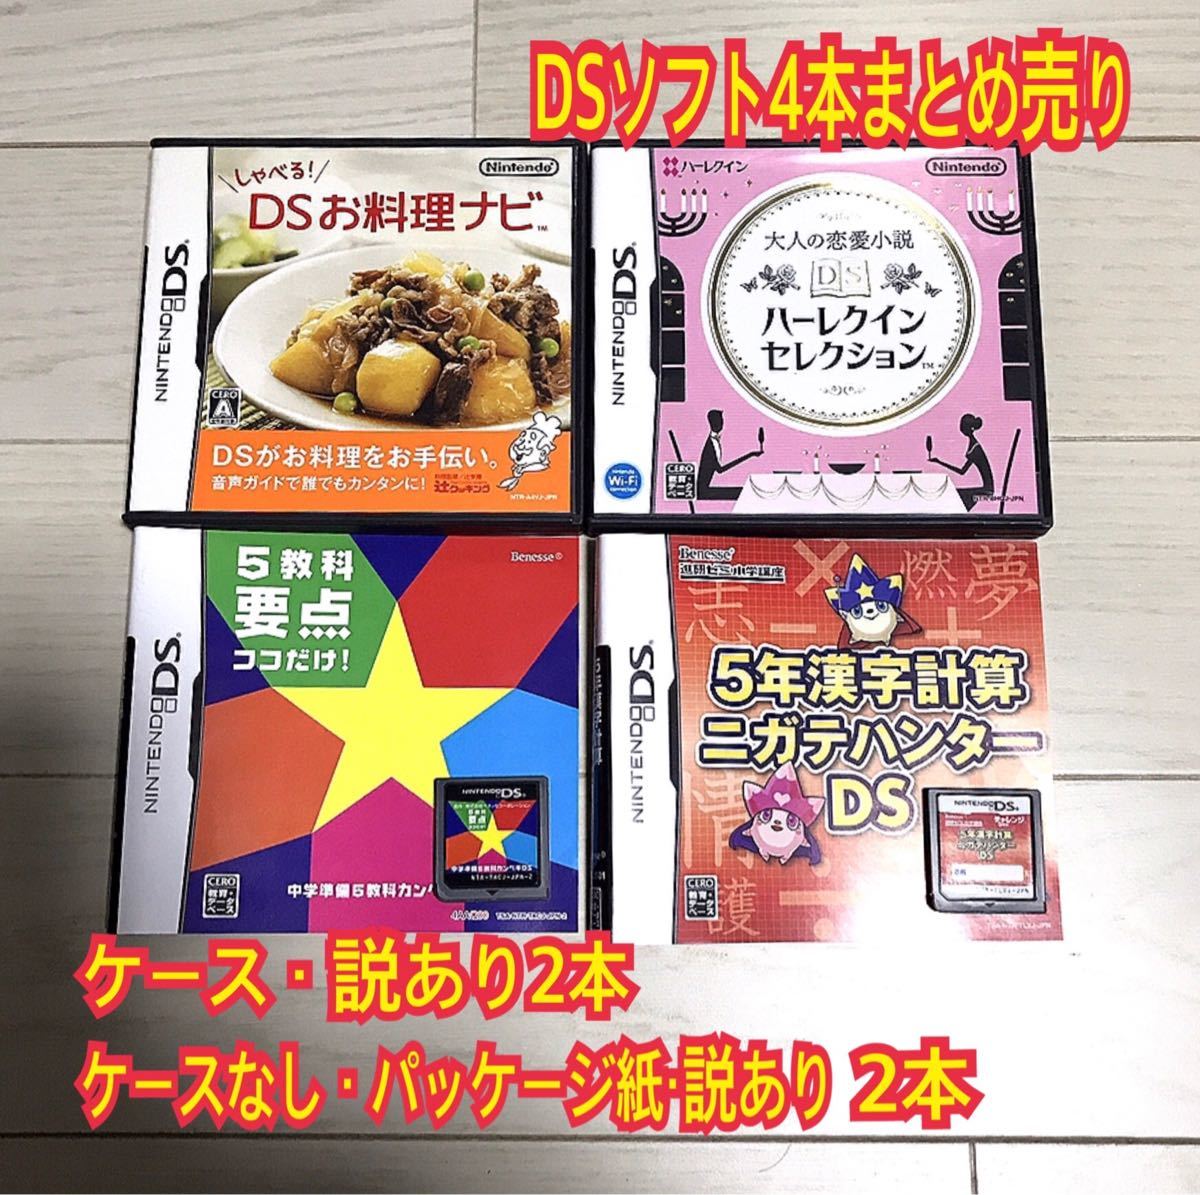 DSソフト 4本まとめ売り